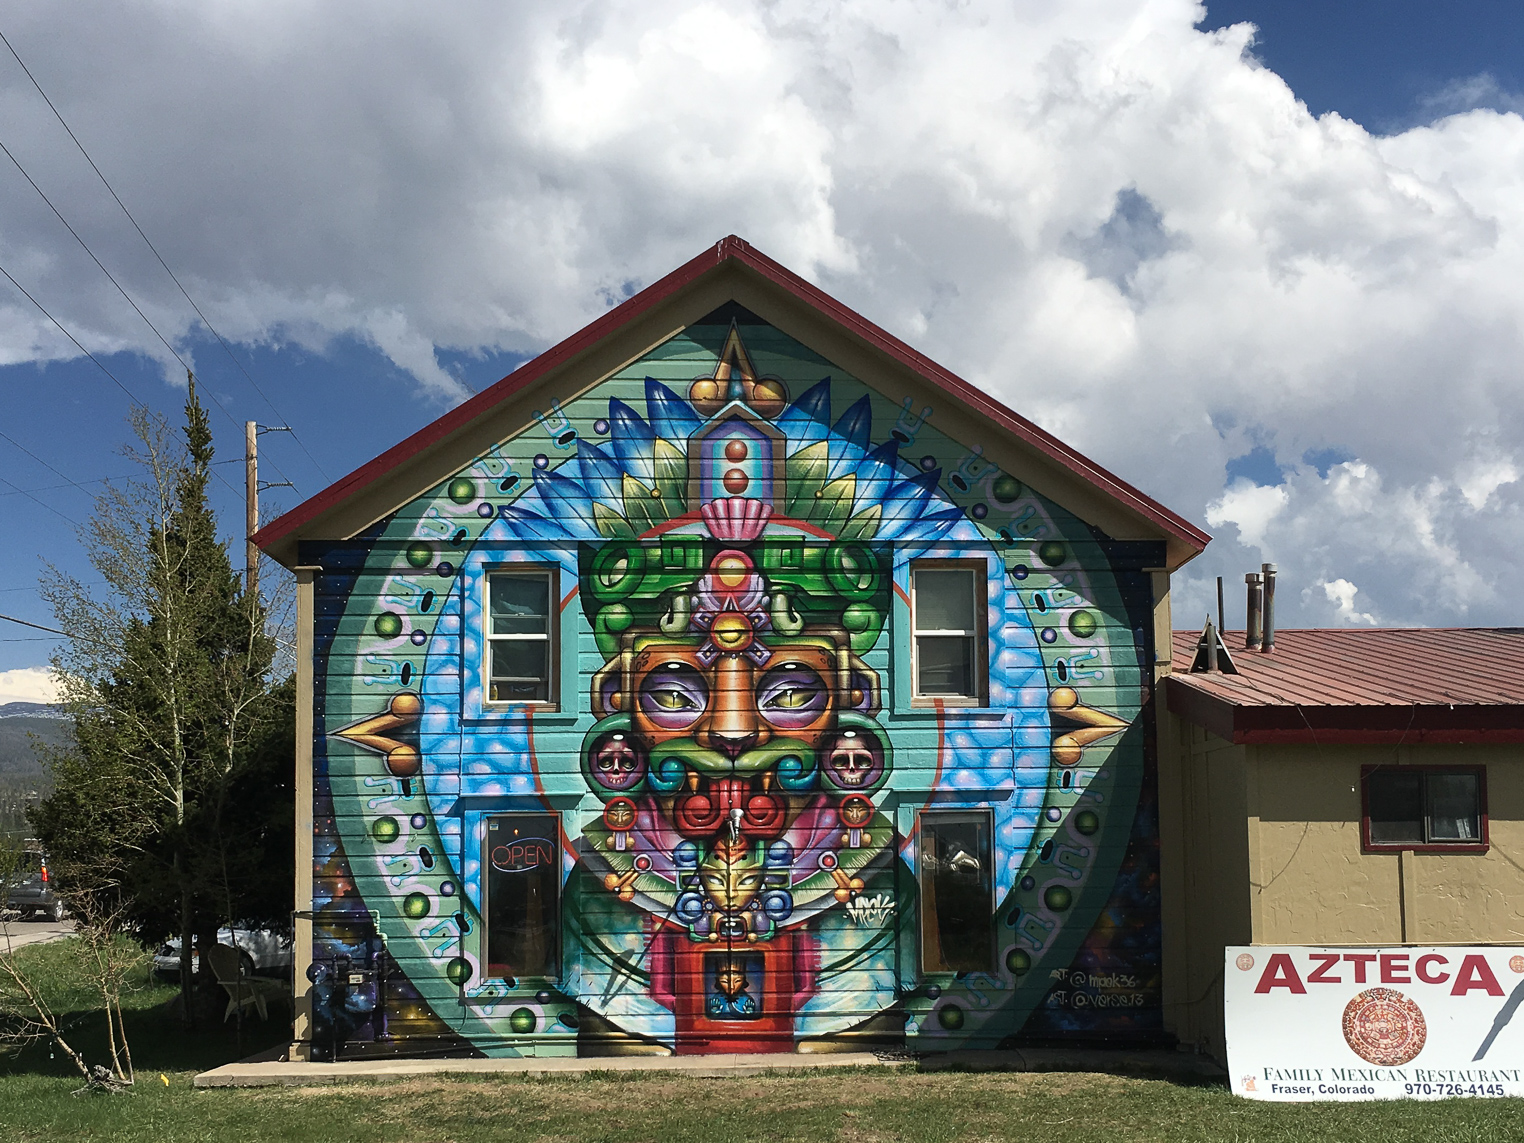 15 Unusual Arts and Culture Festivals in Colorado to Get You Outdoors